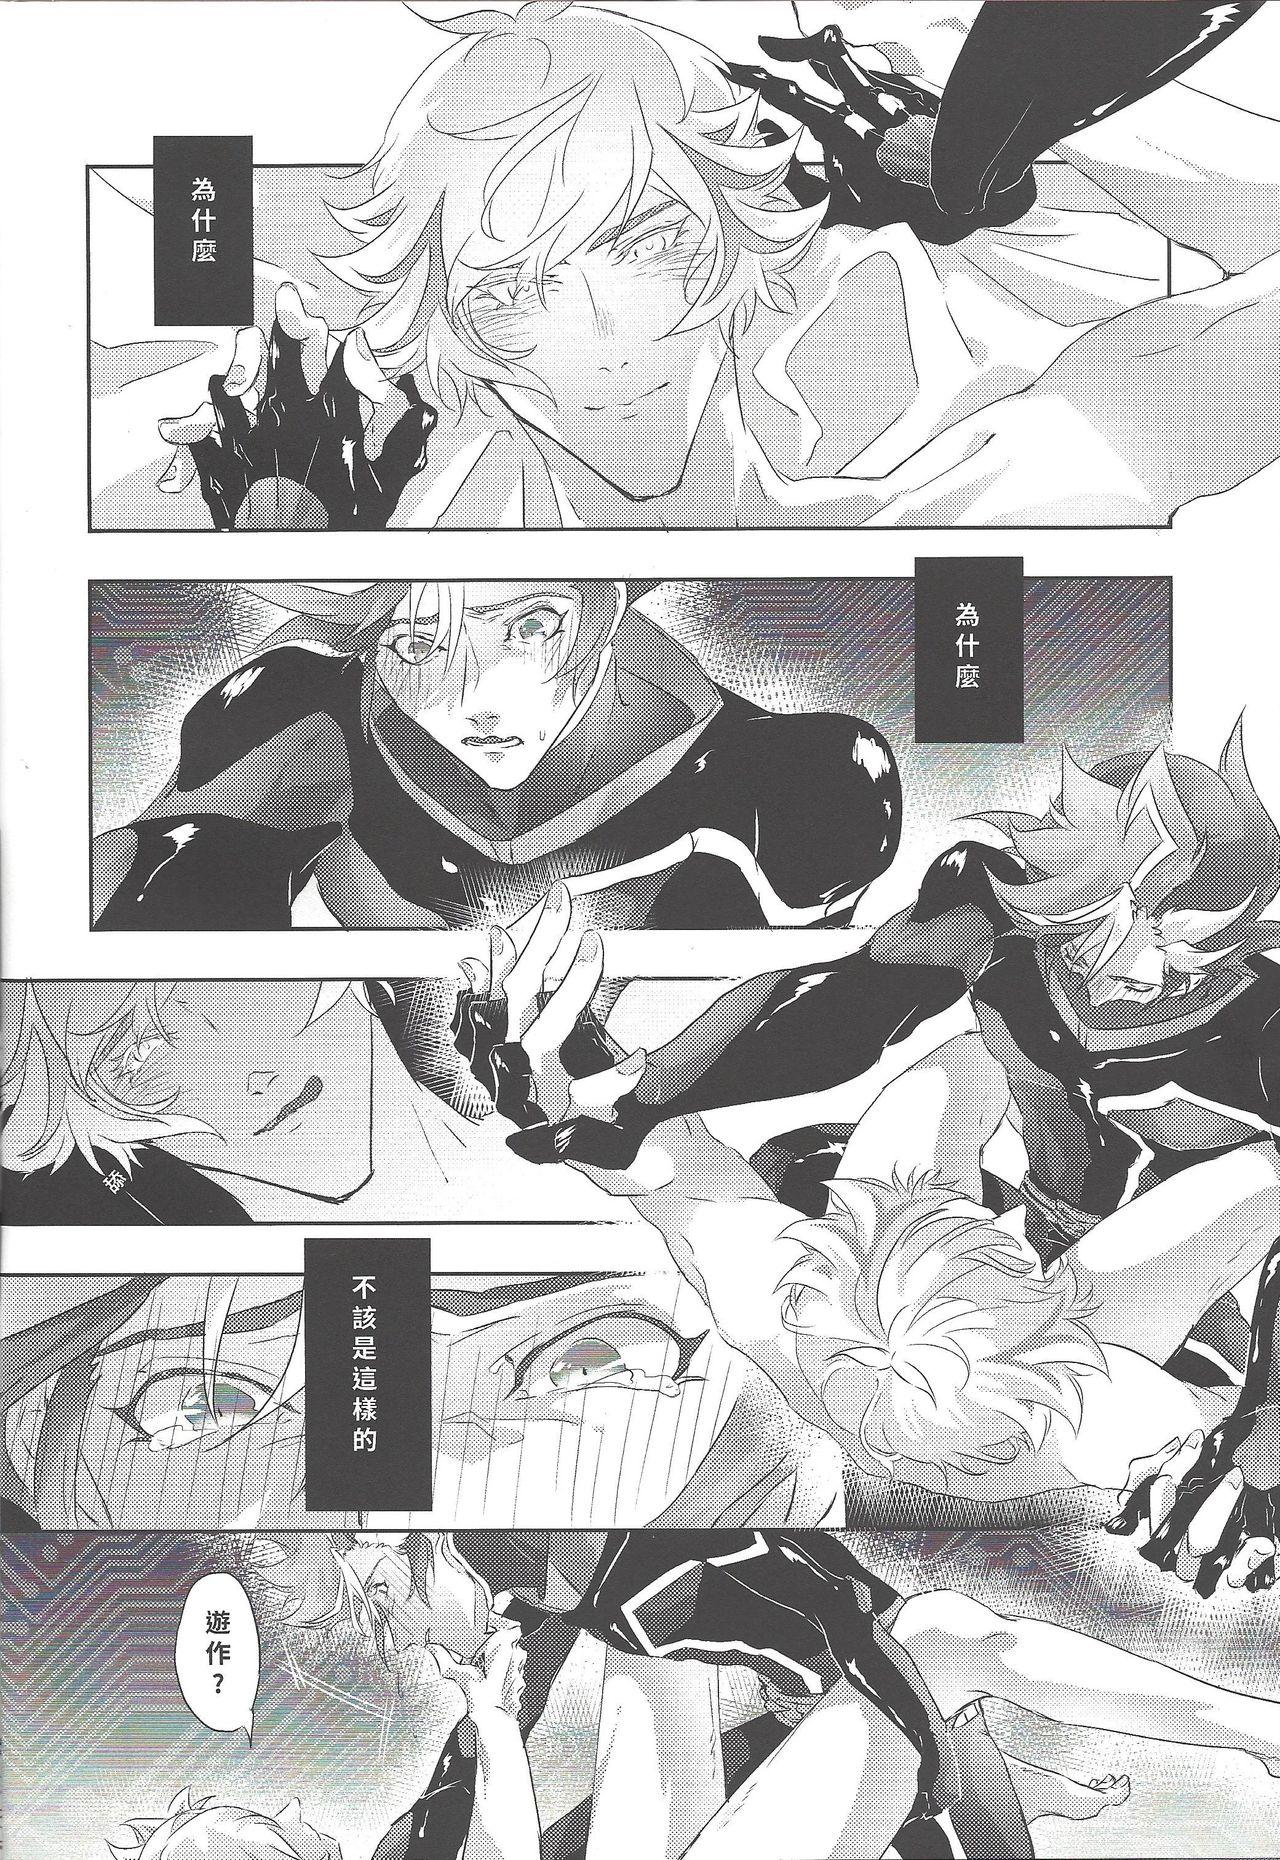 Foot Fetish ERROR - Yu-gi-oh vrains Chaturbate - Page 10